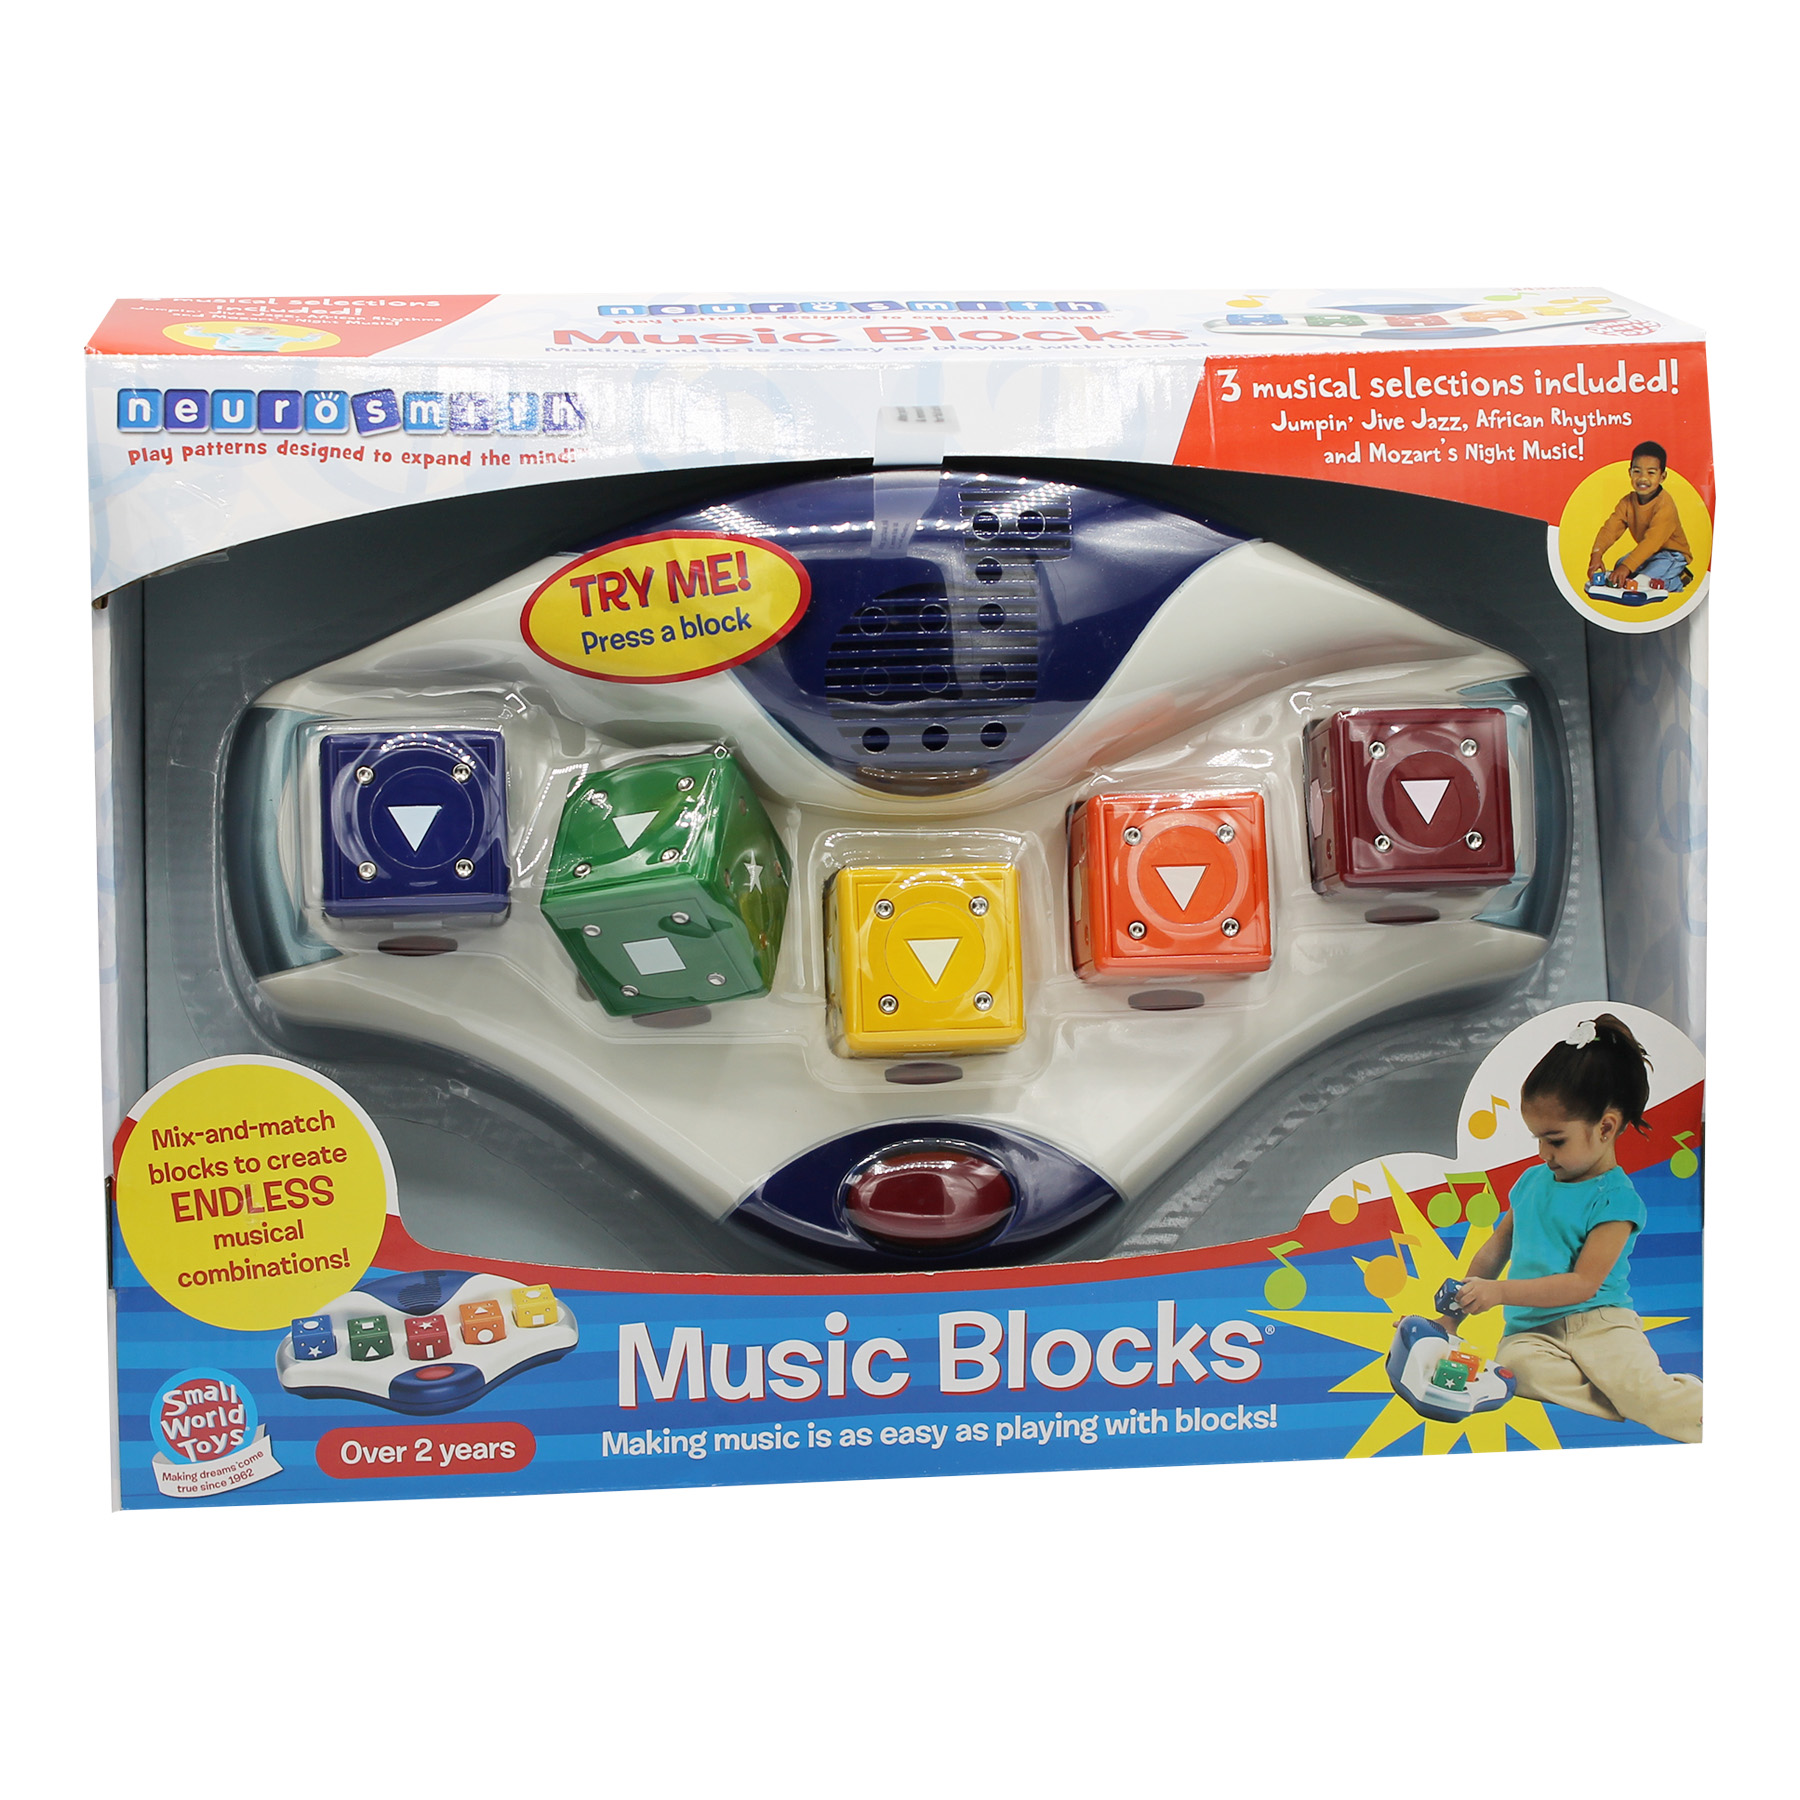 Neurosmith Music Blocks Music Composition Toy image number null